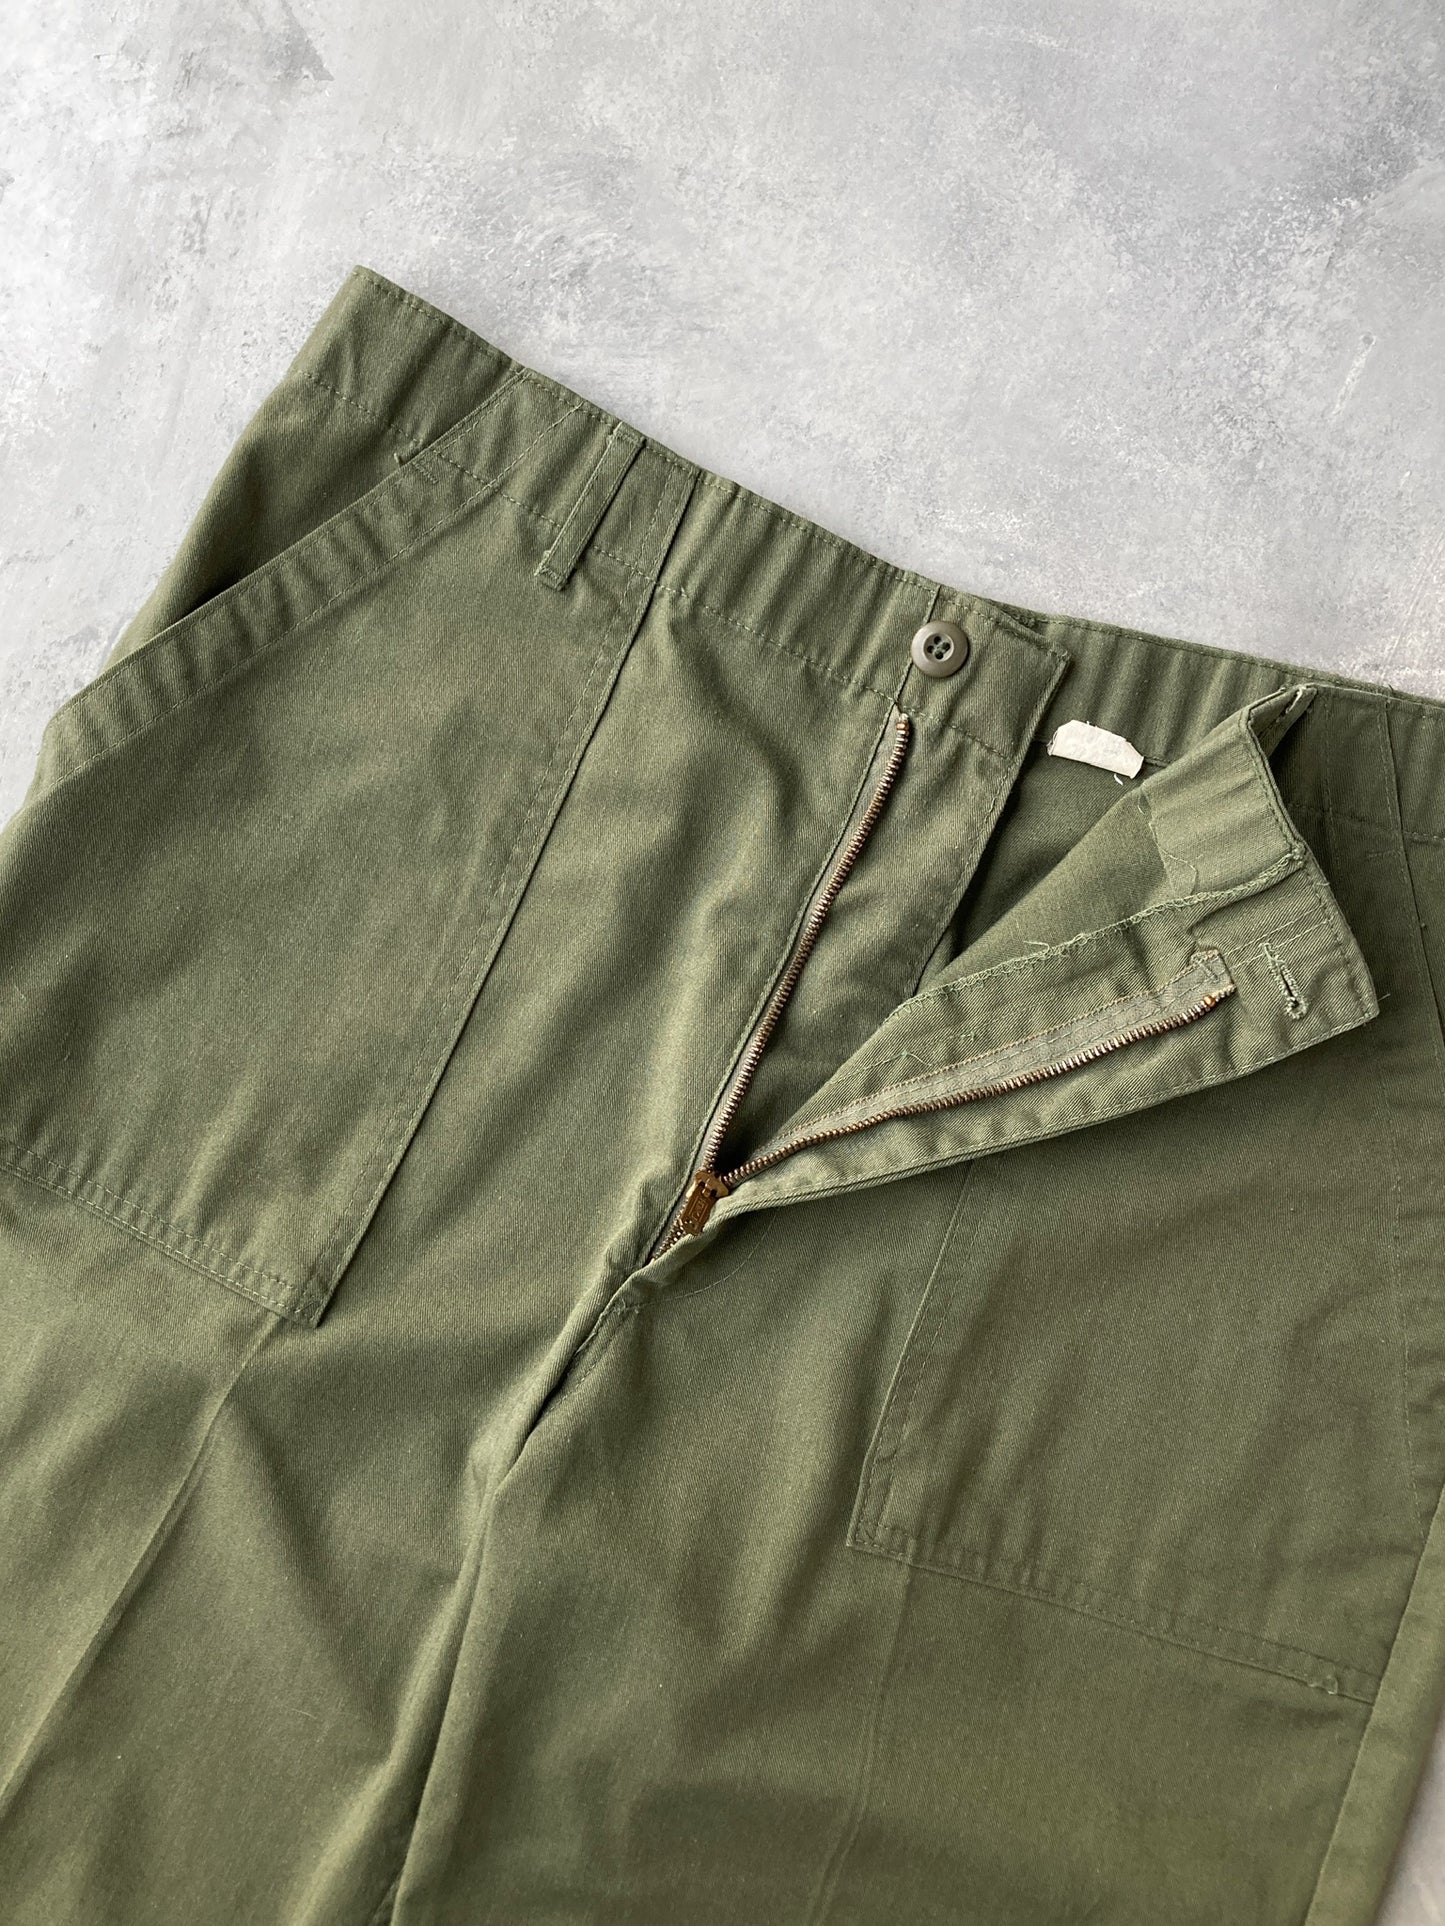 Military Trousers 70's - 38 x 30